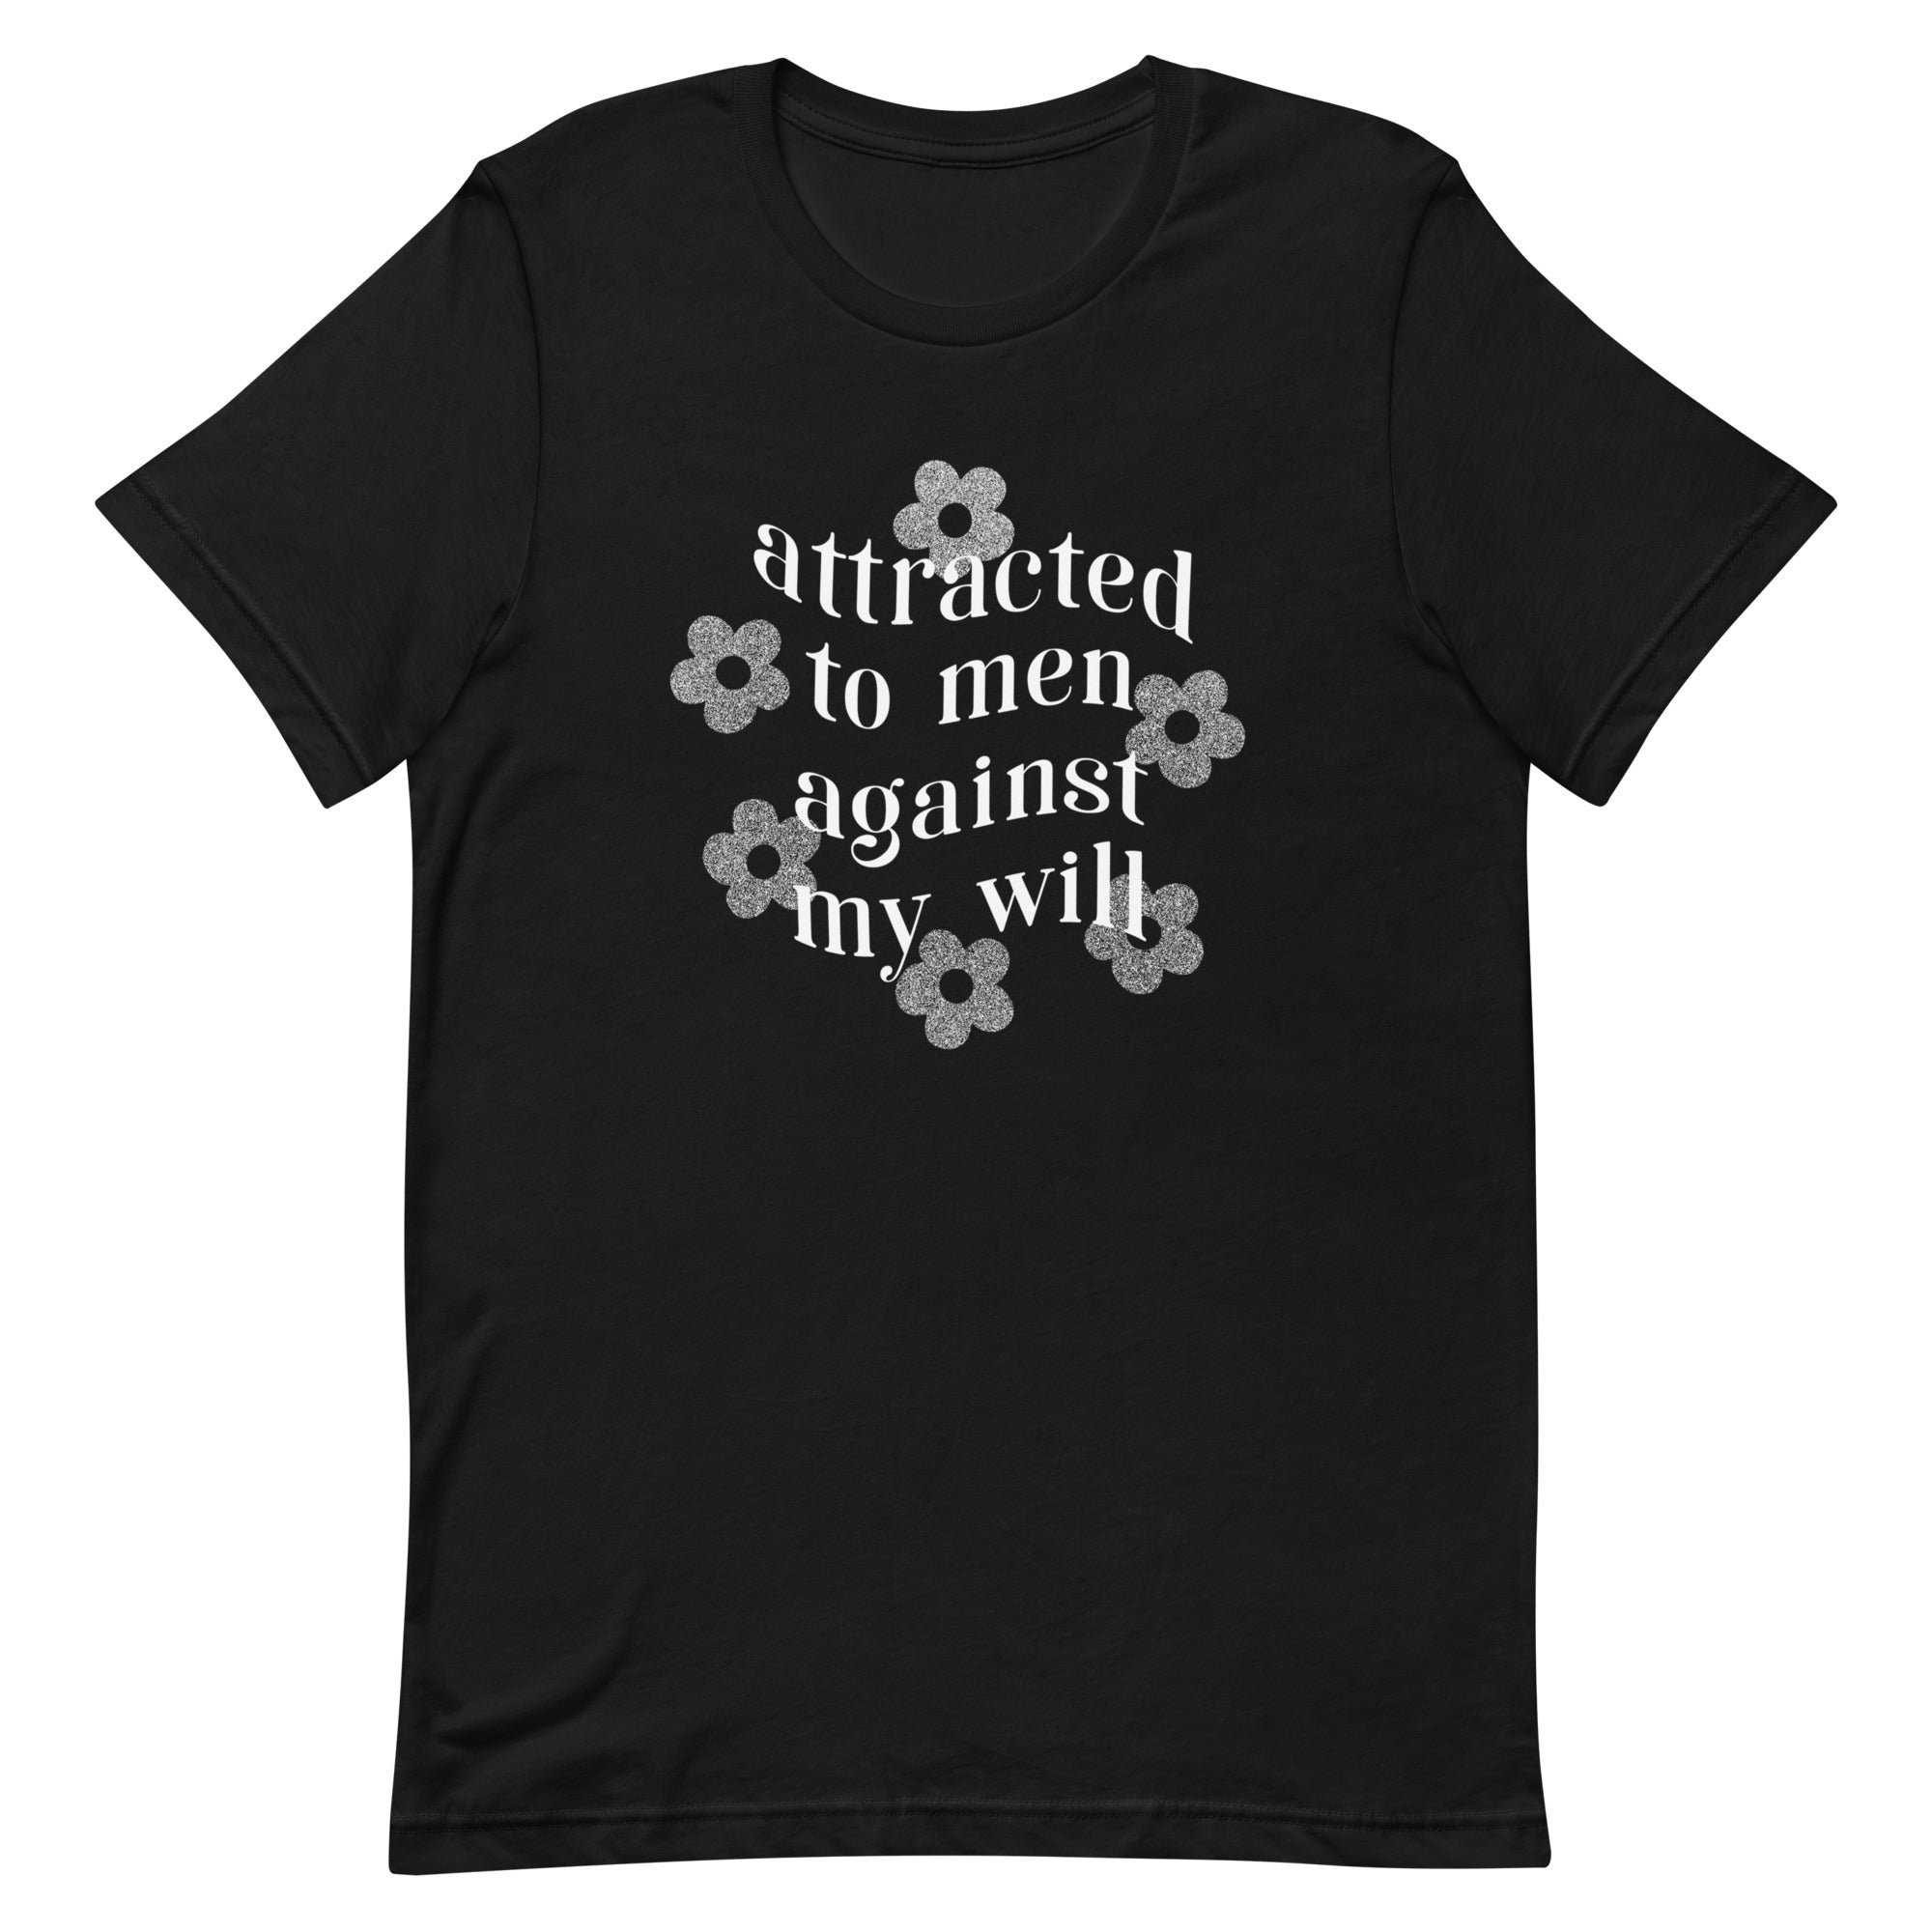 Empowering black feminist shirt with text 'Attracted to Men Against My Will' in white